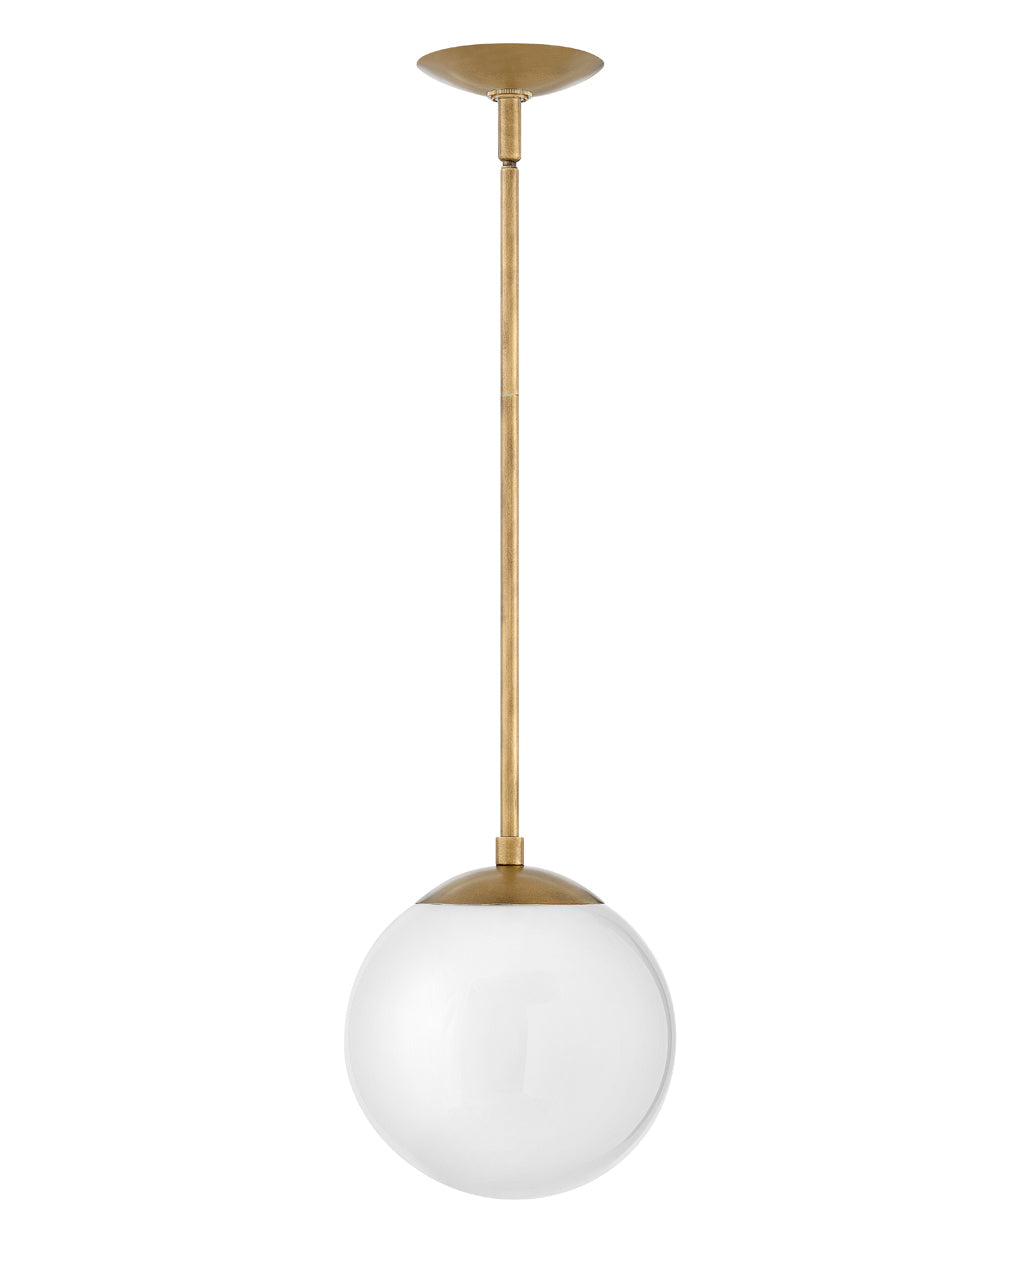 Hinkley Warby Pendant Pendant Hinkley Heritage Brass with White glass 9.5x9.5x10.75 